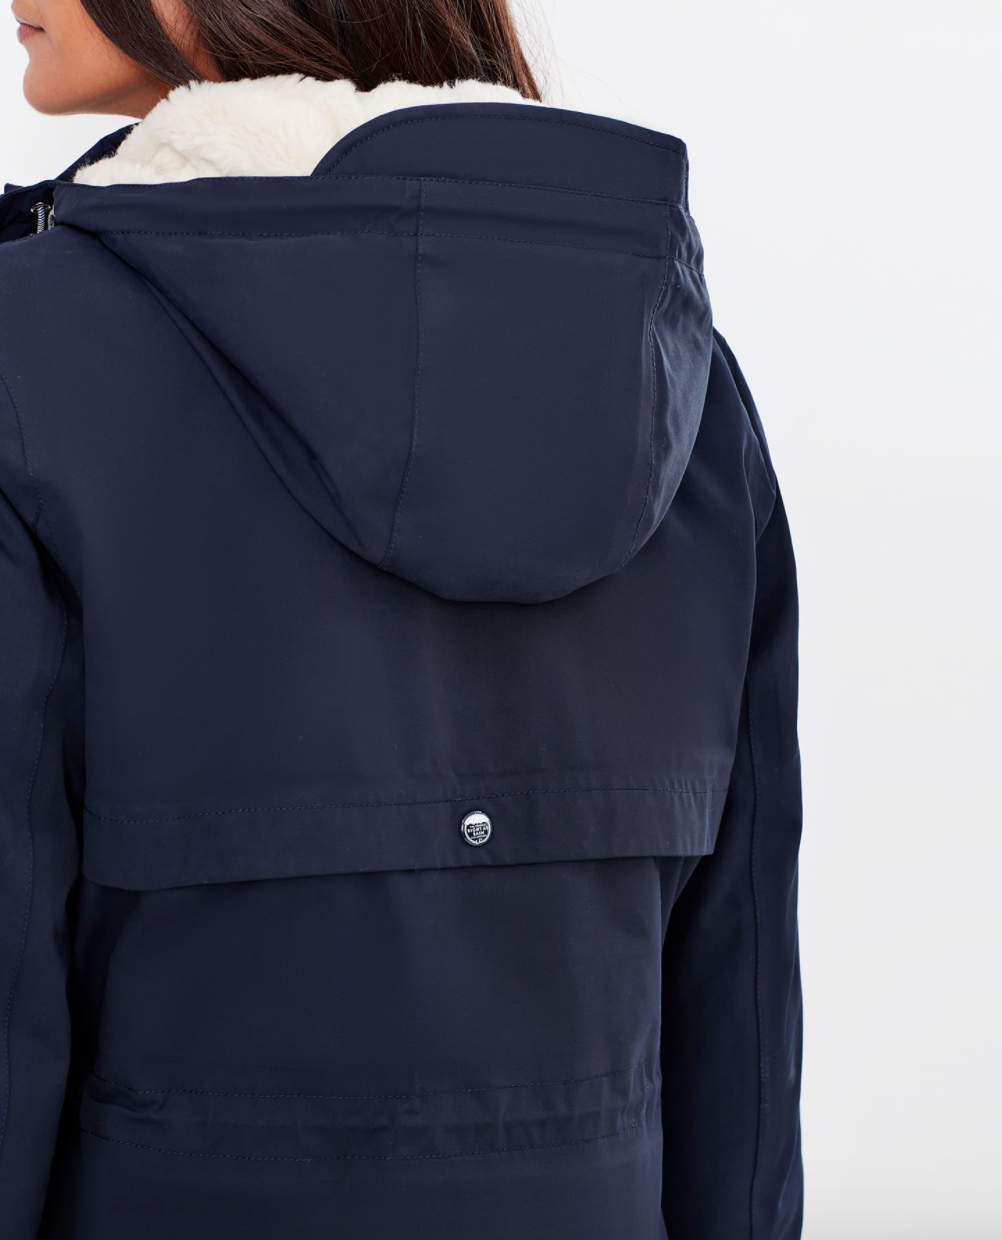 Loxley Cosy Borg Lined Waterproof Coat in Marine Navy